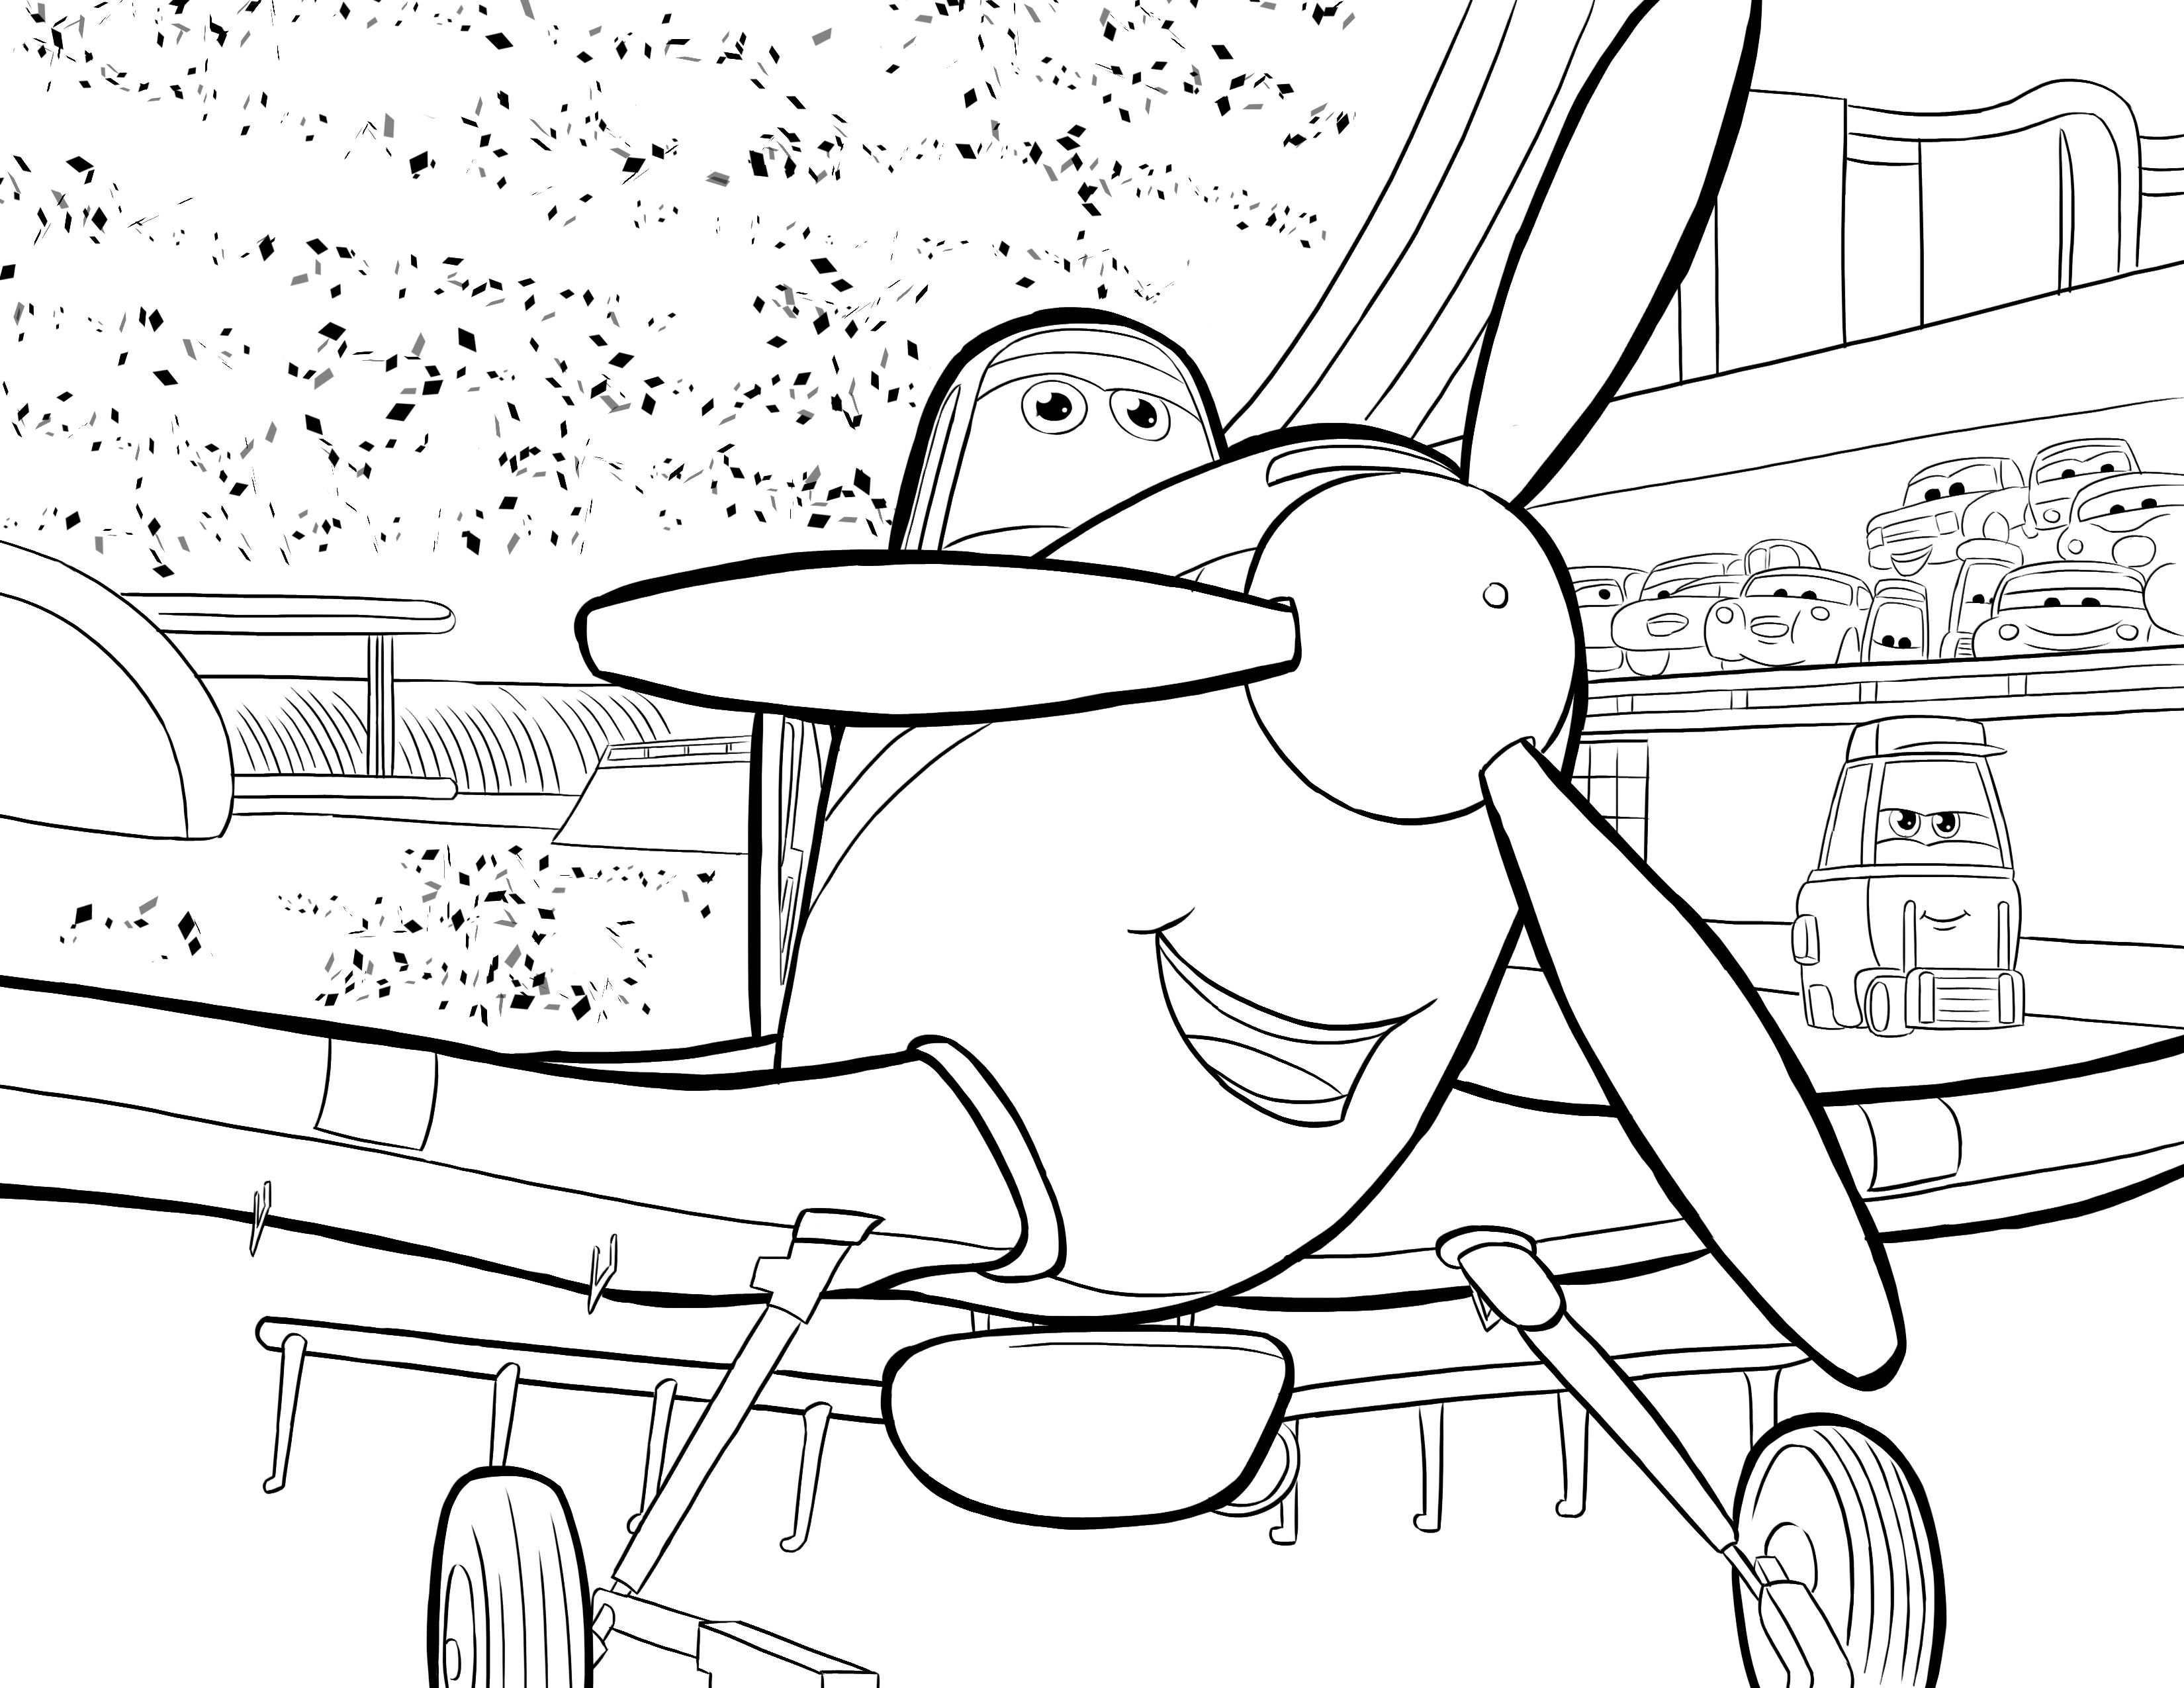 Planes Dusty Crophopper coloring pages for kids | Disney coloring sheets,  Disney coloring pages, Airplane coloring pages